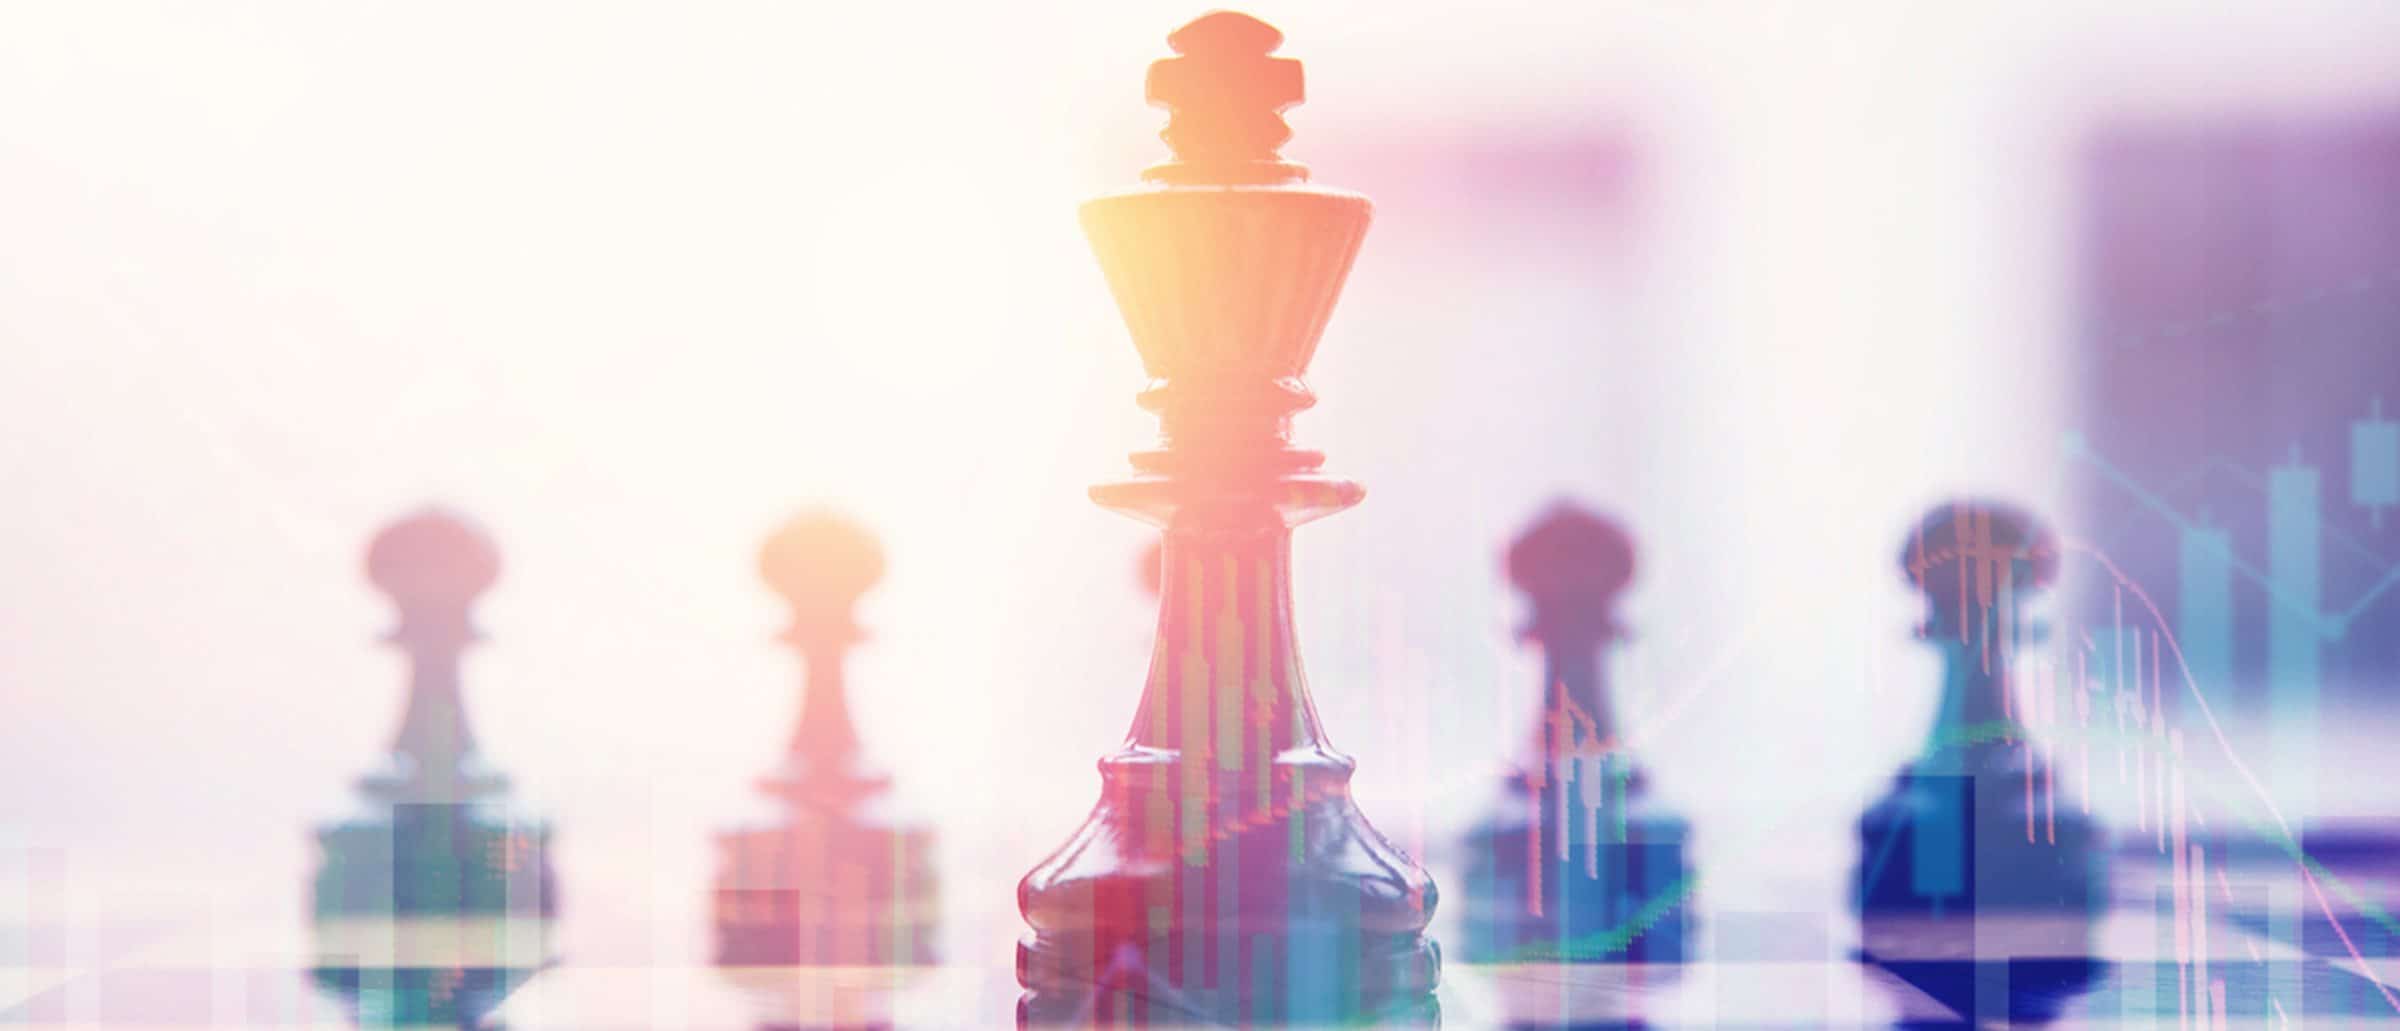 Row of chess pieces with bigger piece in middle, abstract data figures across